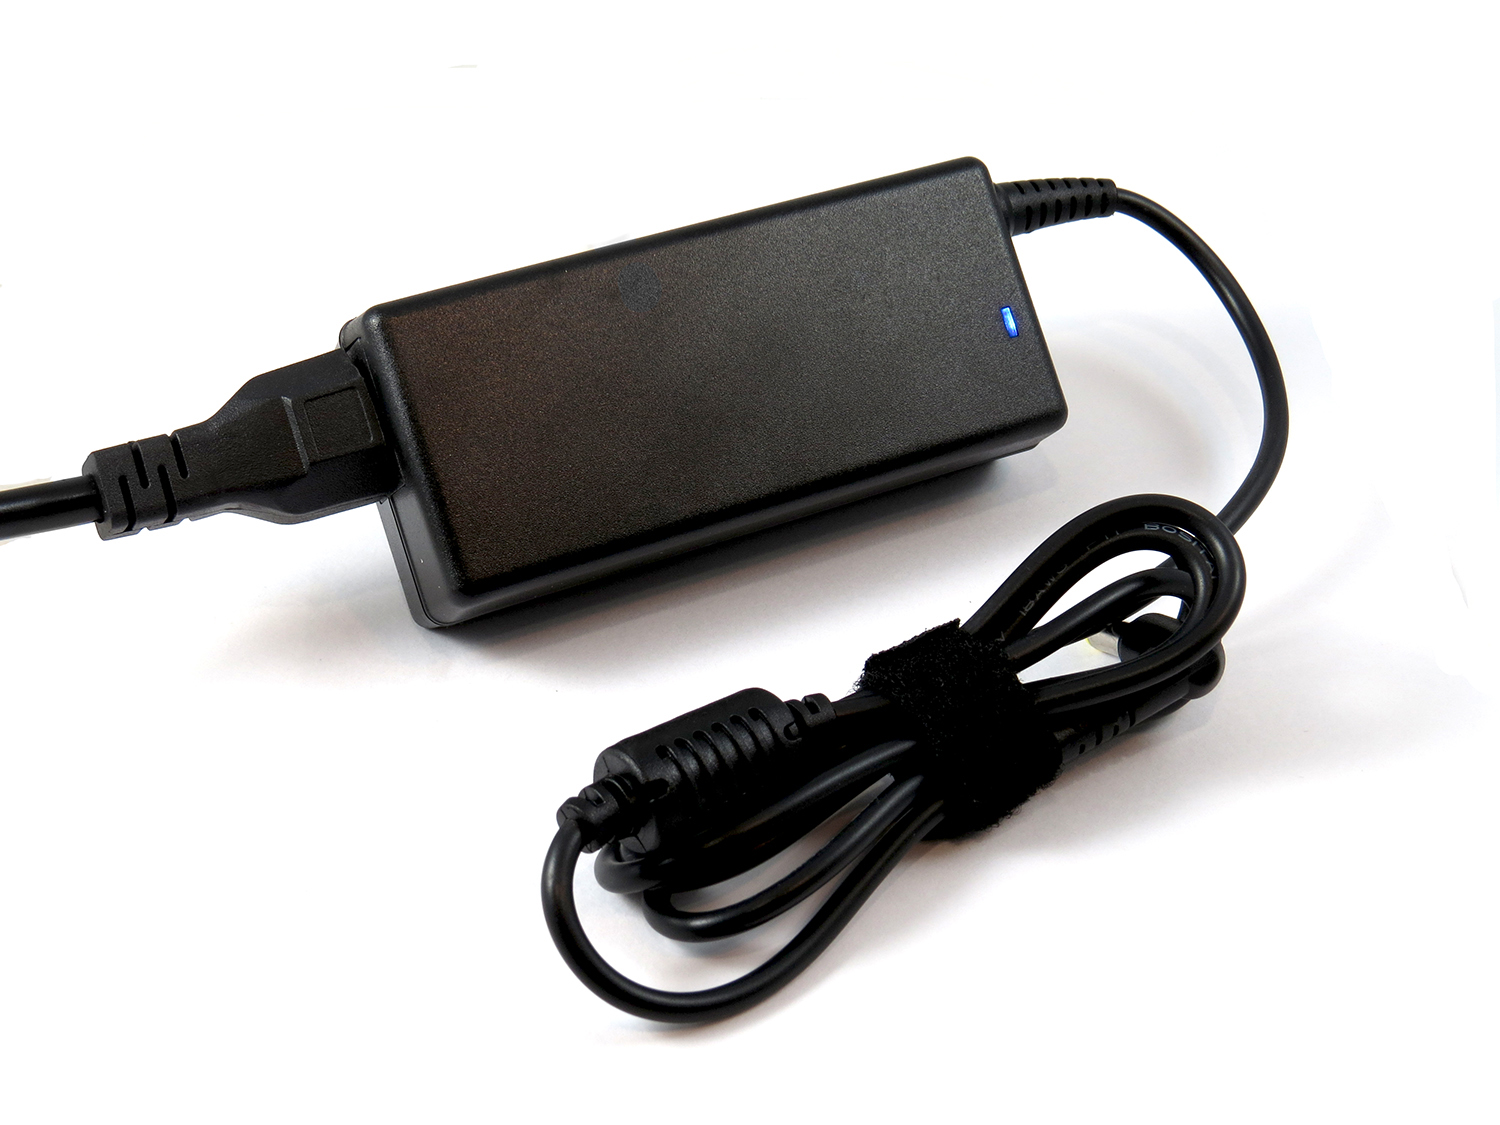 AMSK POWER AC Adapter for Samsung Series 5 XE500C21-A04US XE500C21-H04US XE550C22-A01US XE550C22-H01US XE500C21-A01US XE500C21-A02US XE500C21-A03US - image 2 of 3